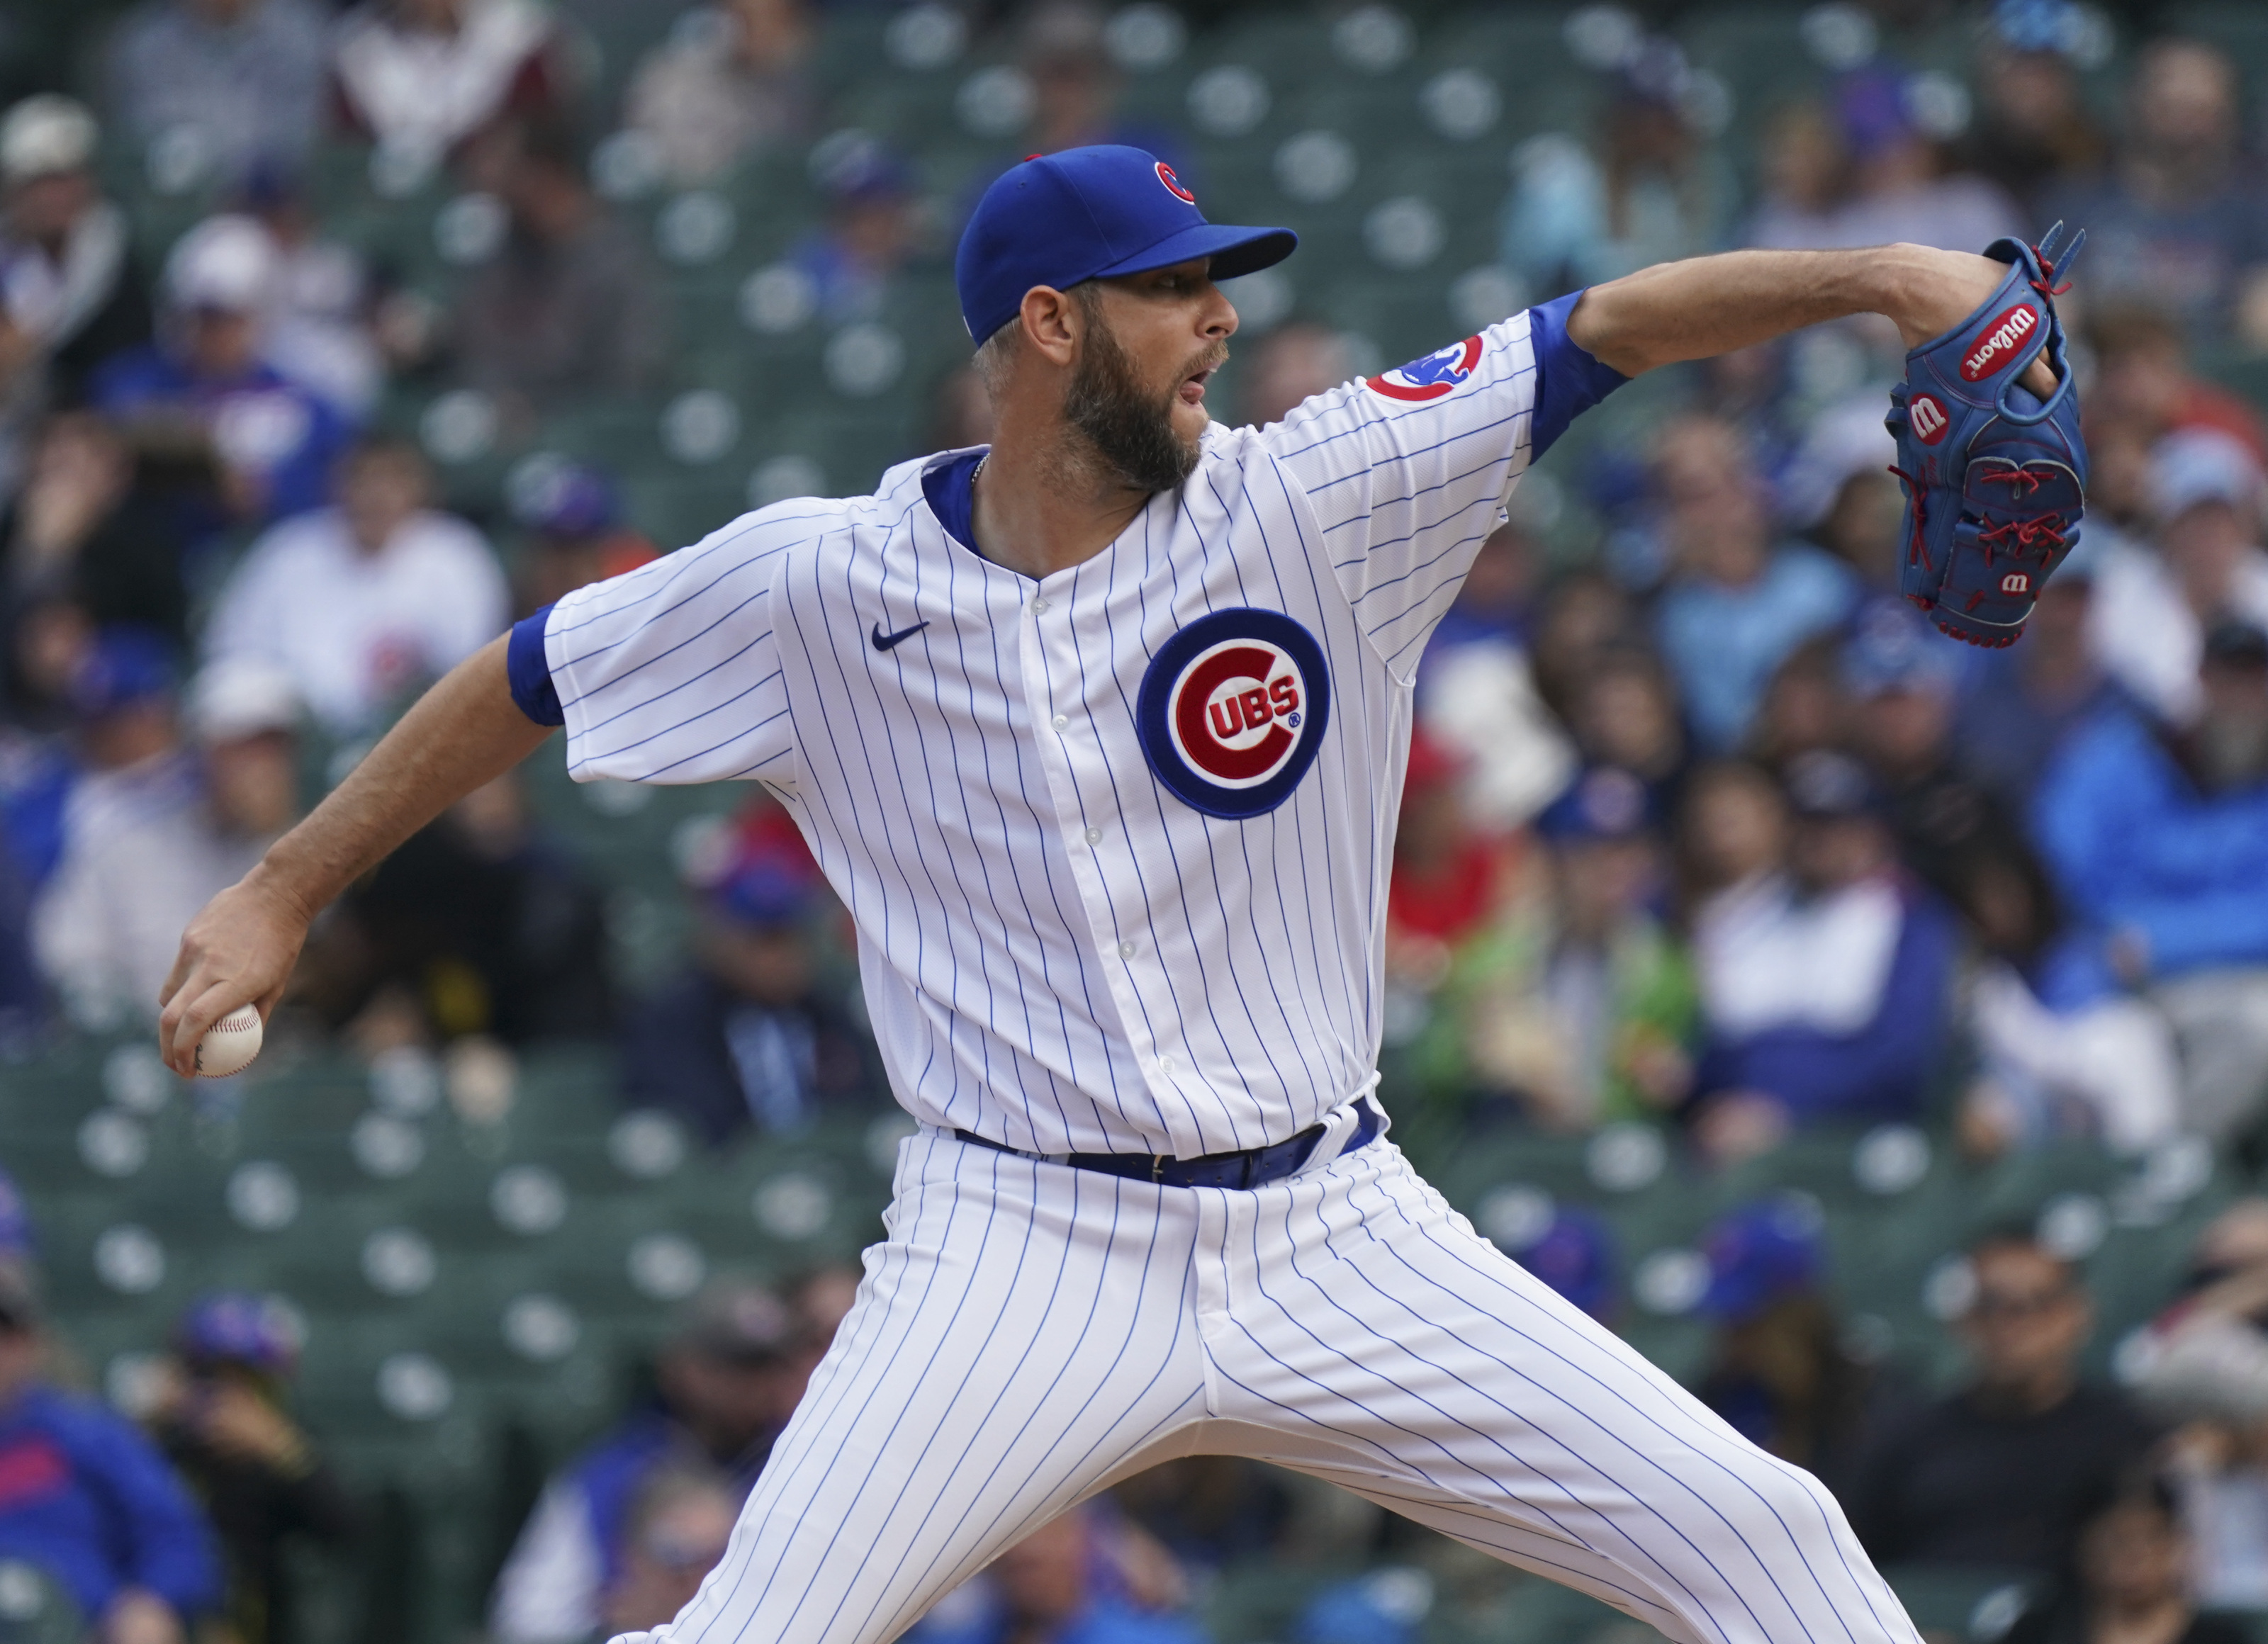 Cubs' offensive makeup could change at trade deadline - Chicago Sun-Times